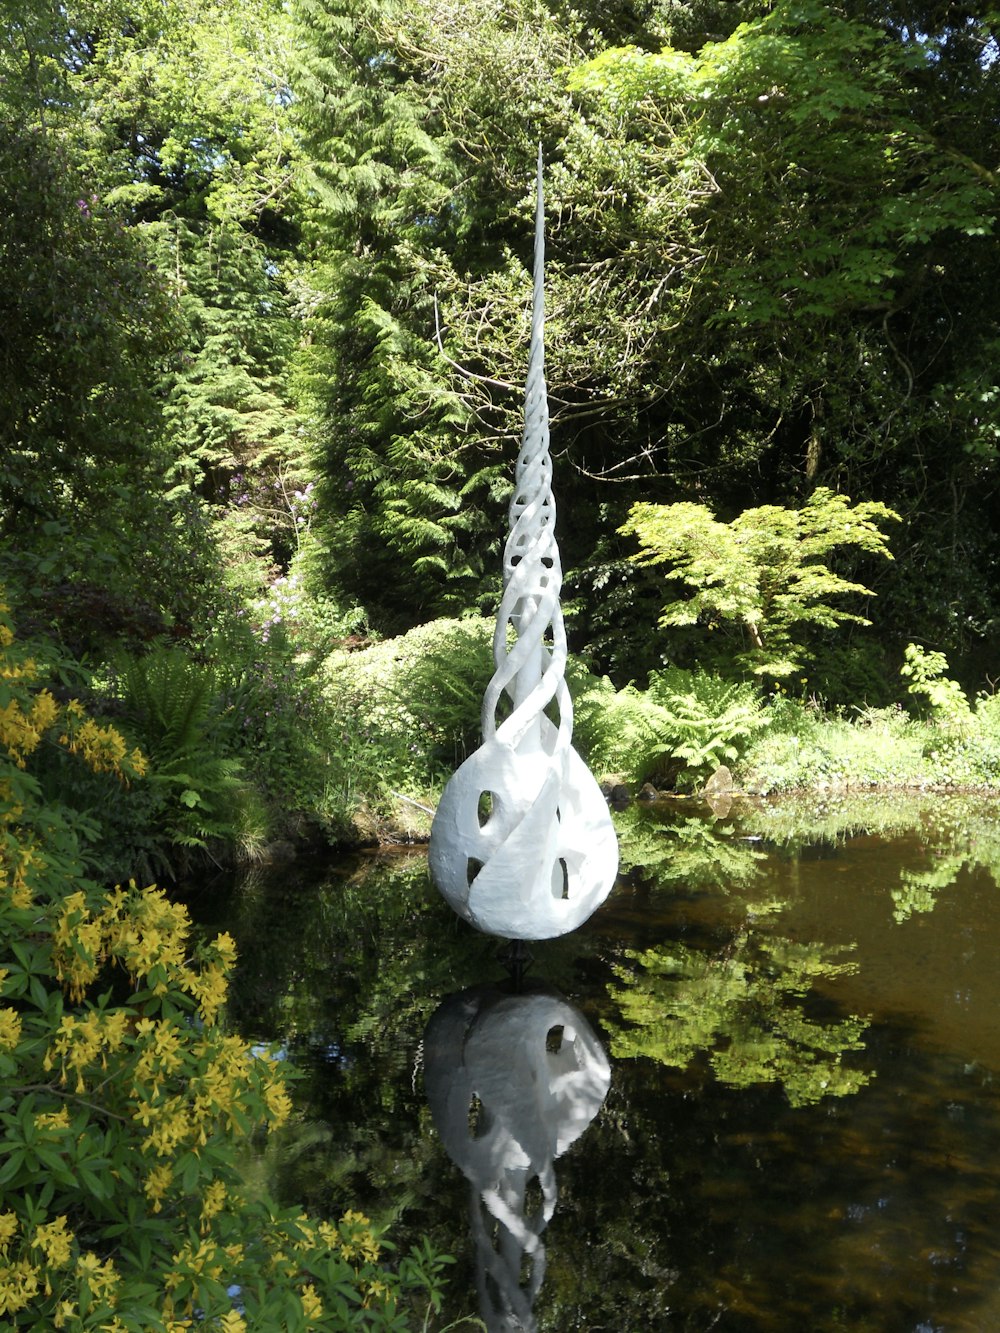 a large white sculpture sitting in the middle of a forest